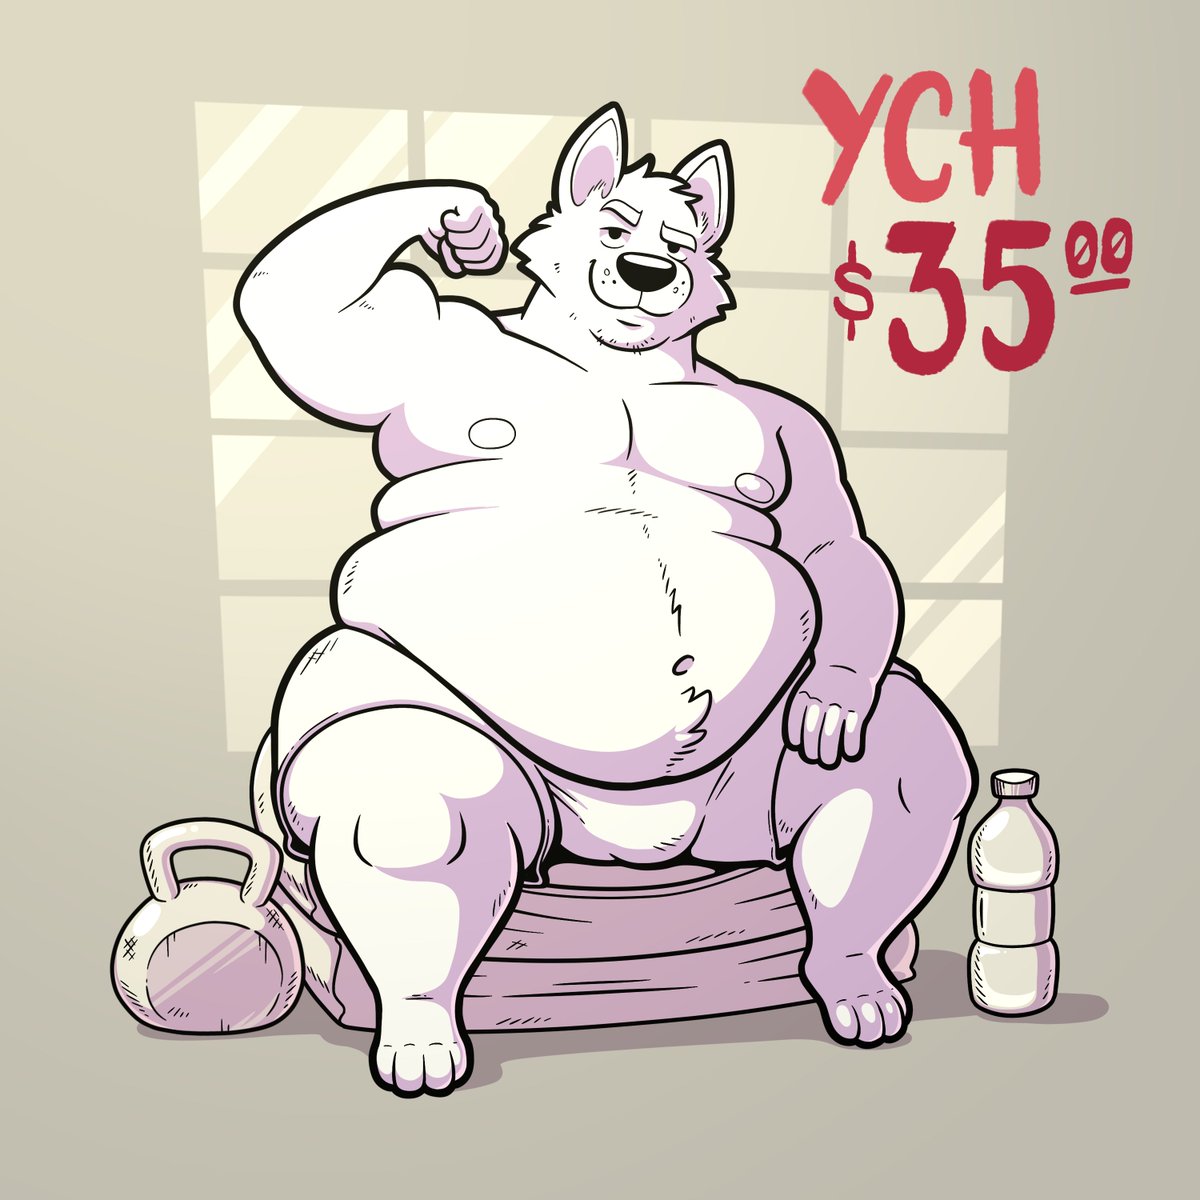 Hey there! I'm opening 10 YCH slots Fill out the form below if you're interested 👇